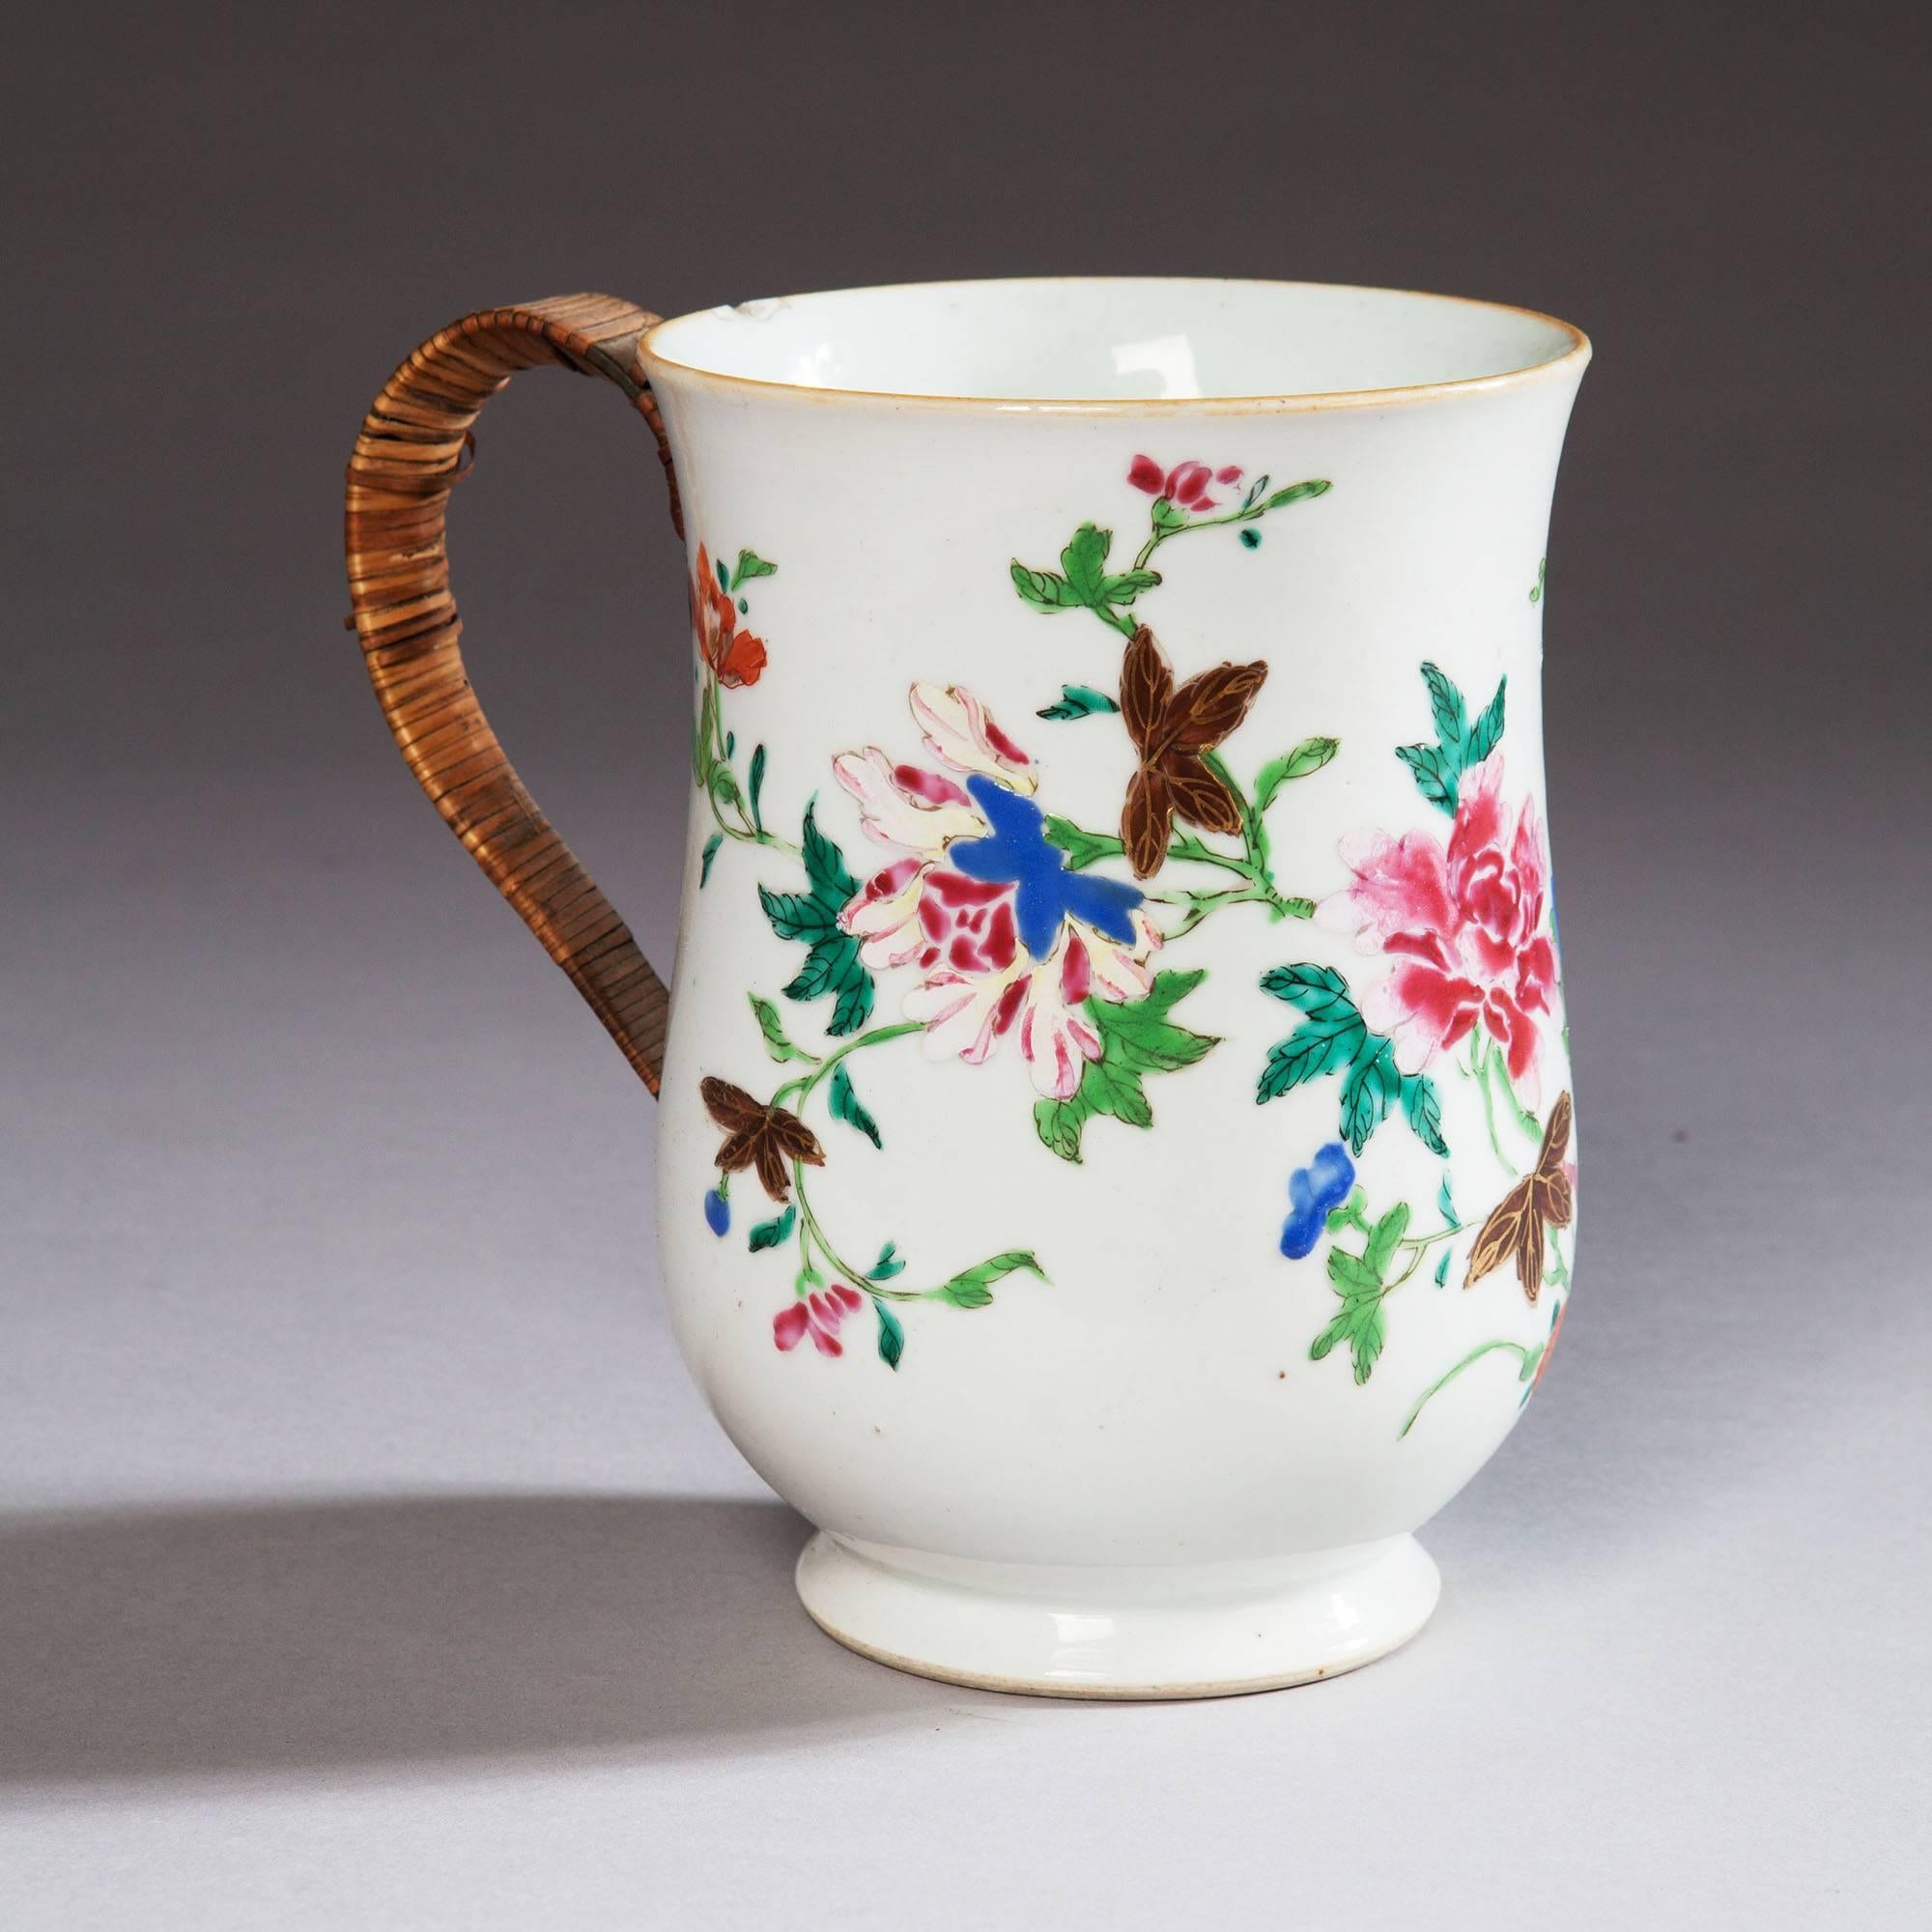 A Chinese export famille rose tankard having a straw weave replacement handle and decorated with rocks and flowers of bold design.
China, circa 1750.
Measures: Height 8 in (20 cms).